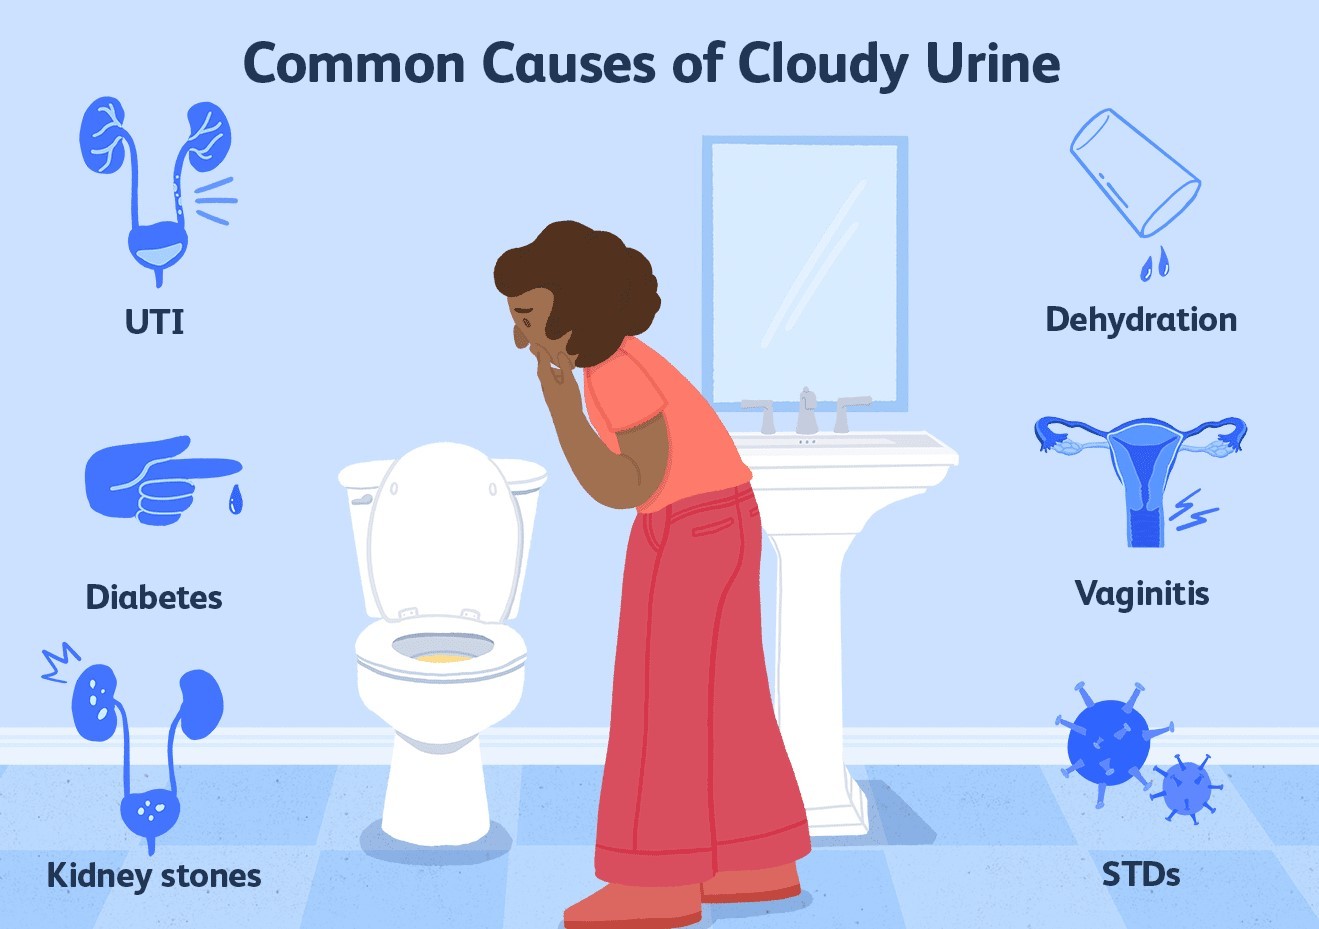 Cloudy Urine During Pregnancy: Signs, Symptoms, Causes, and Treatment